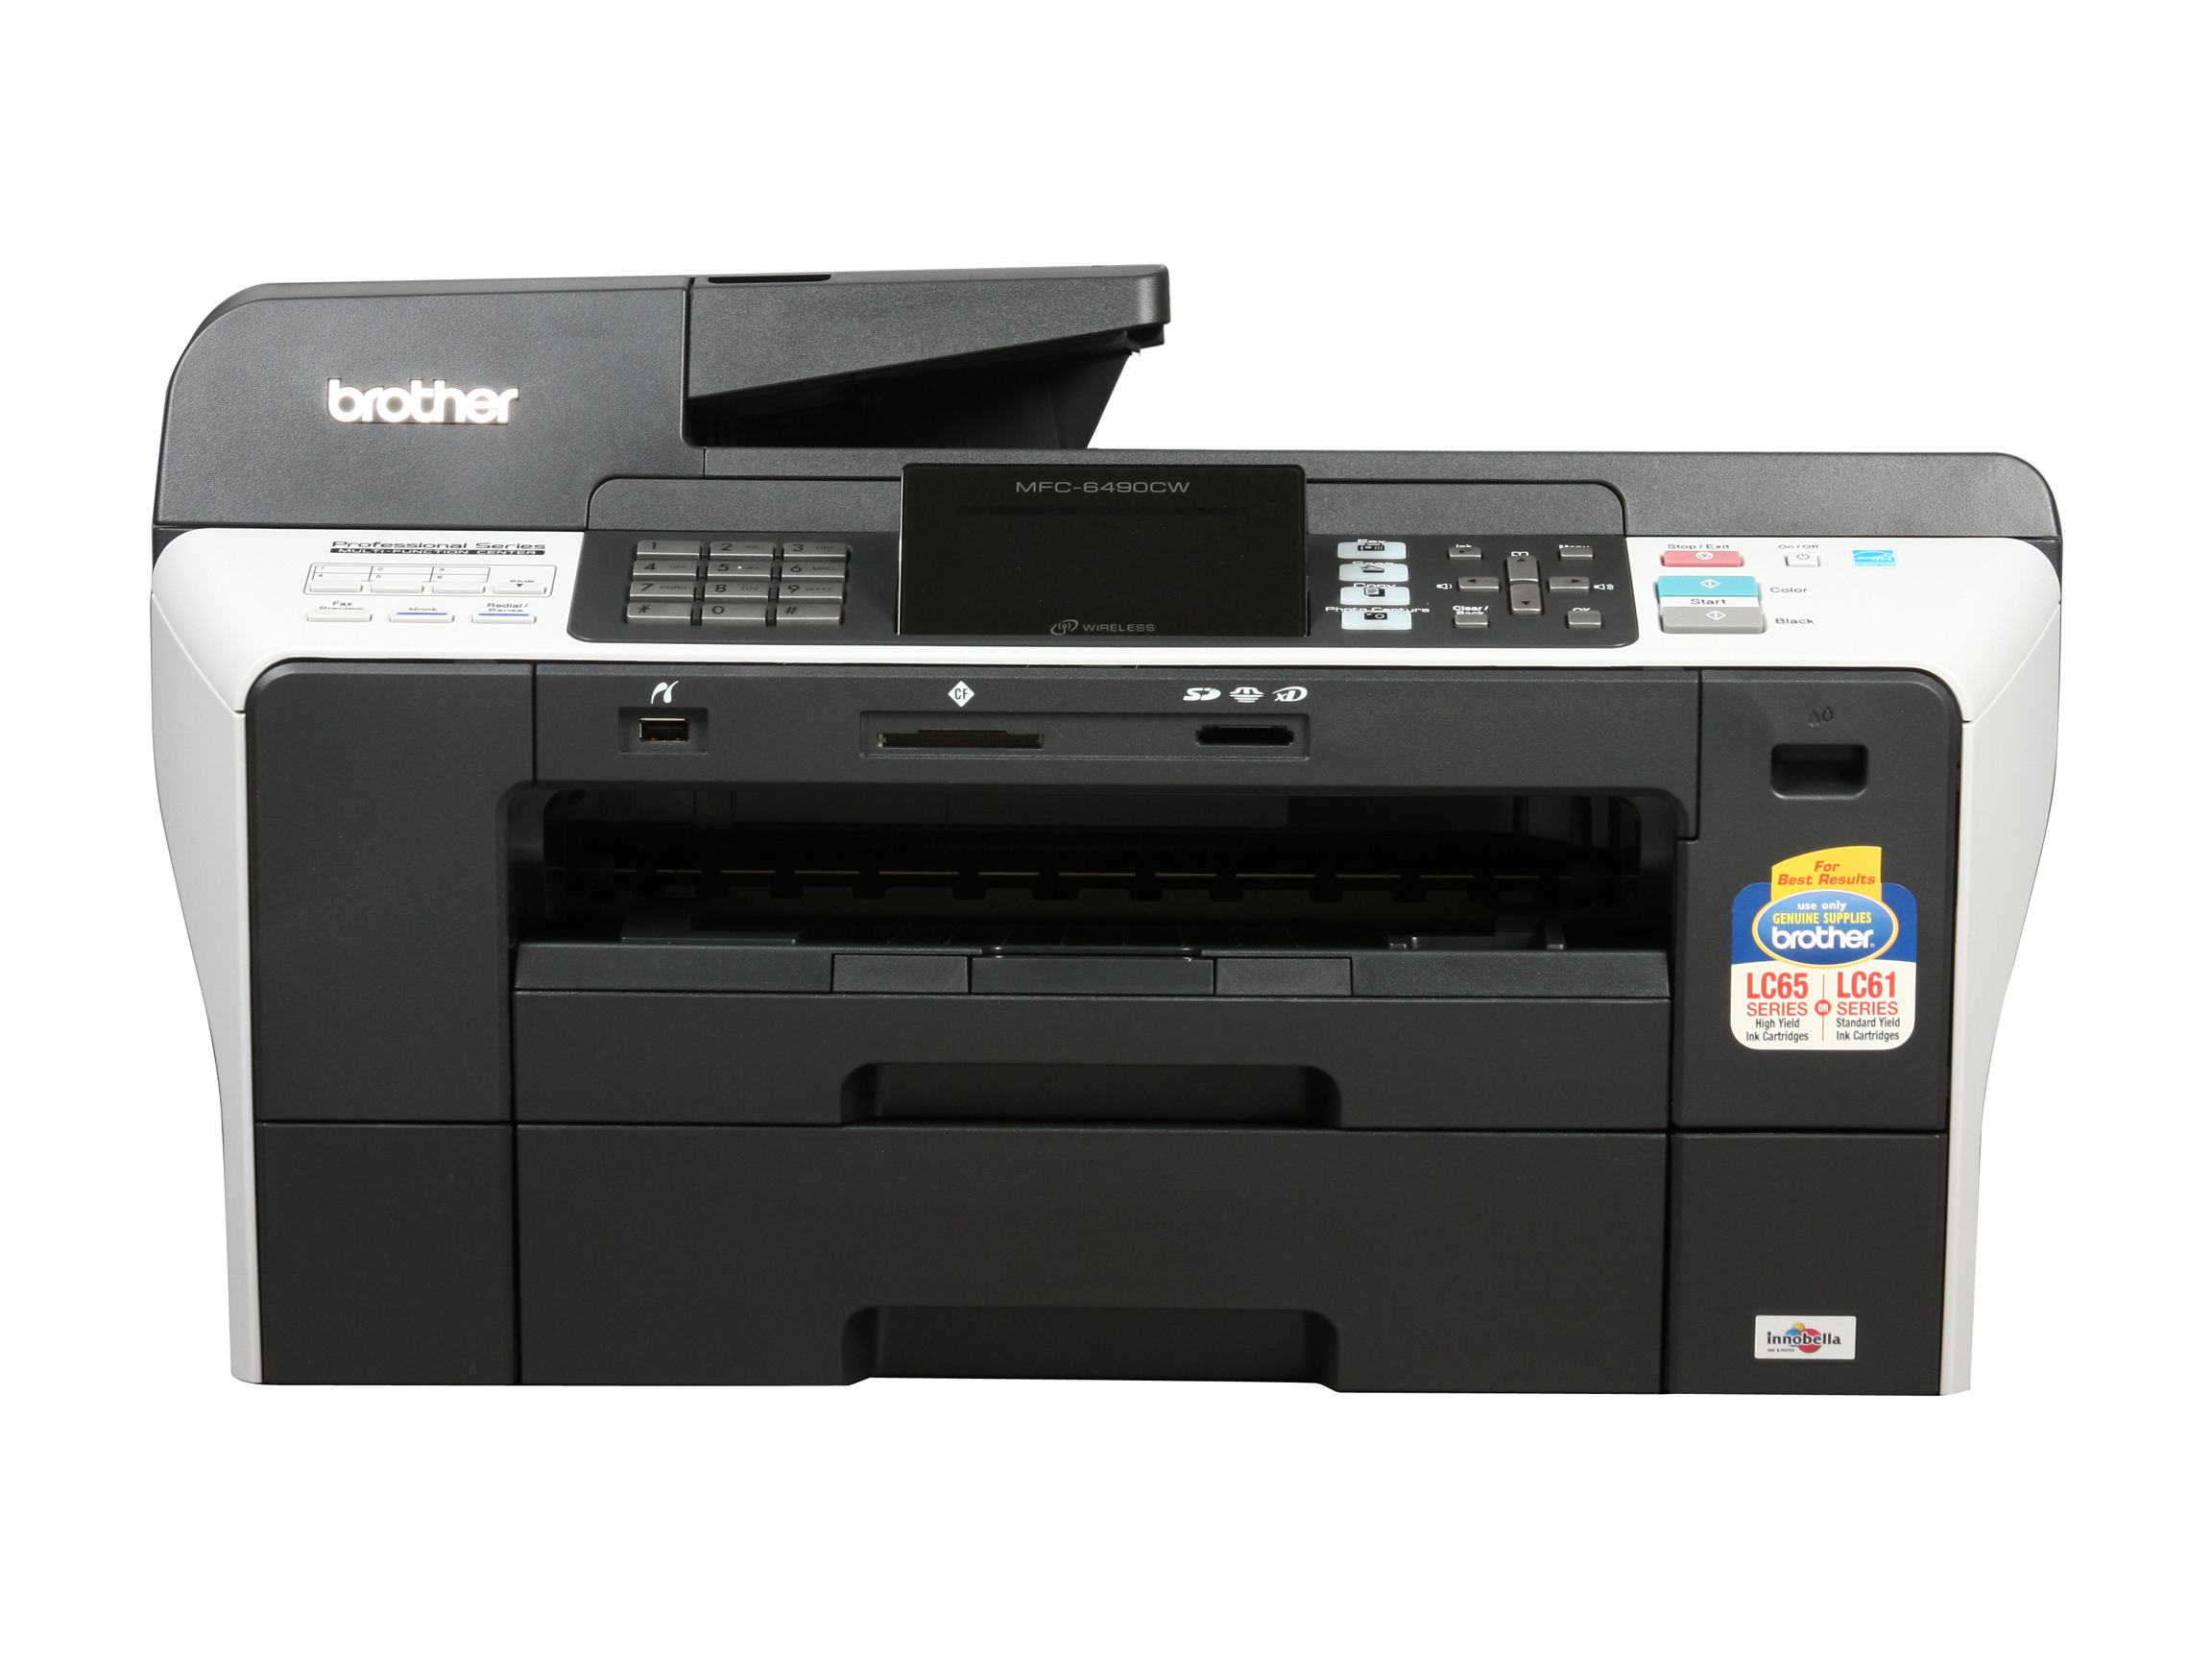 Brother Professional Series MFC 6490CW Inkjet All in One Printer with up to 11" x 17" Printing and Dual Paper Trays